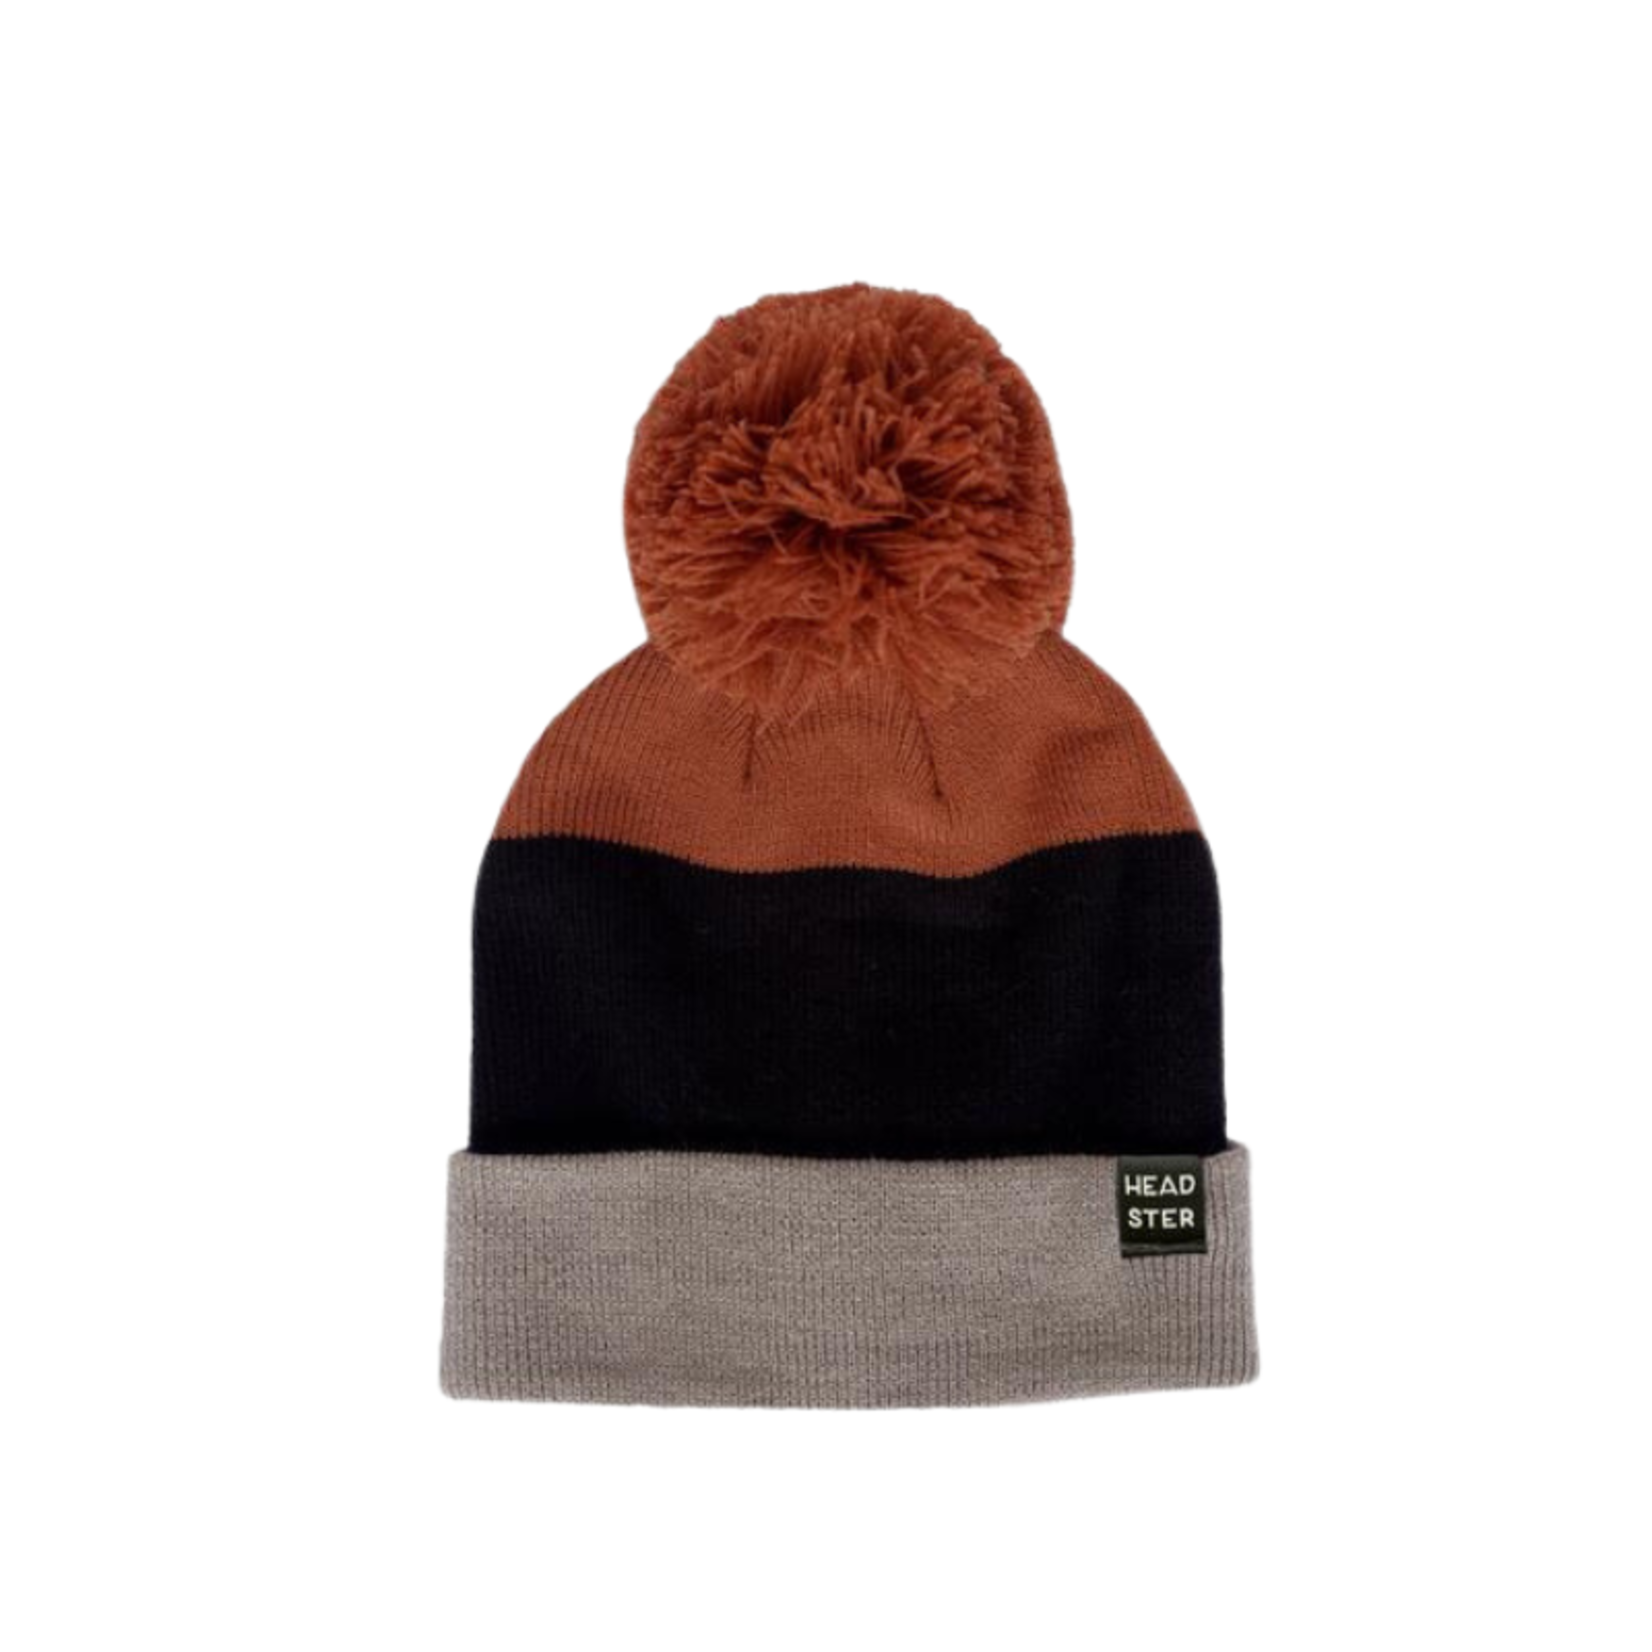 Headster Headster Beanie PomPom Tricolor Ginger